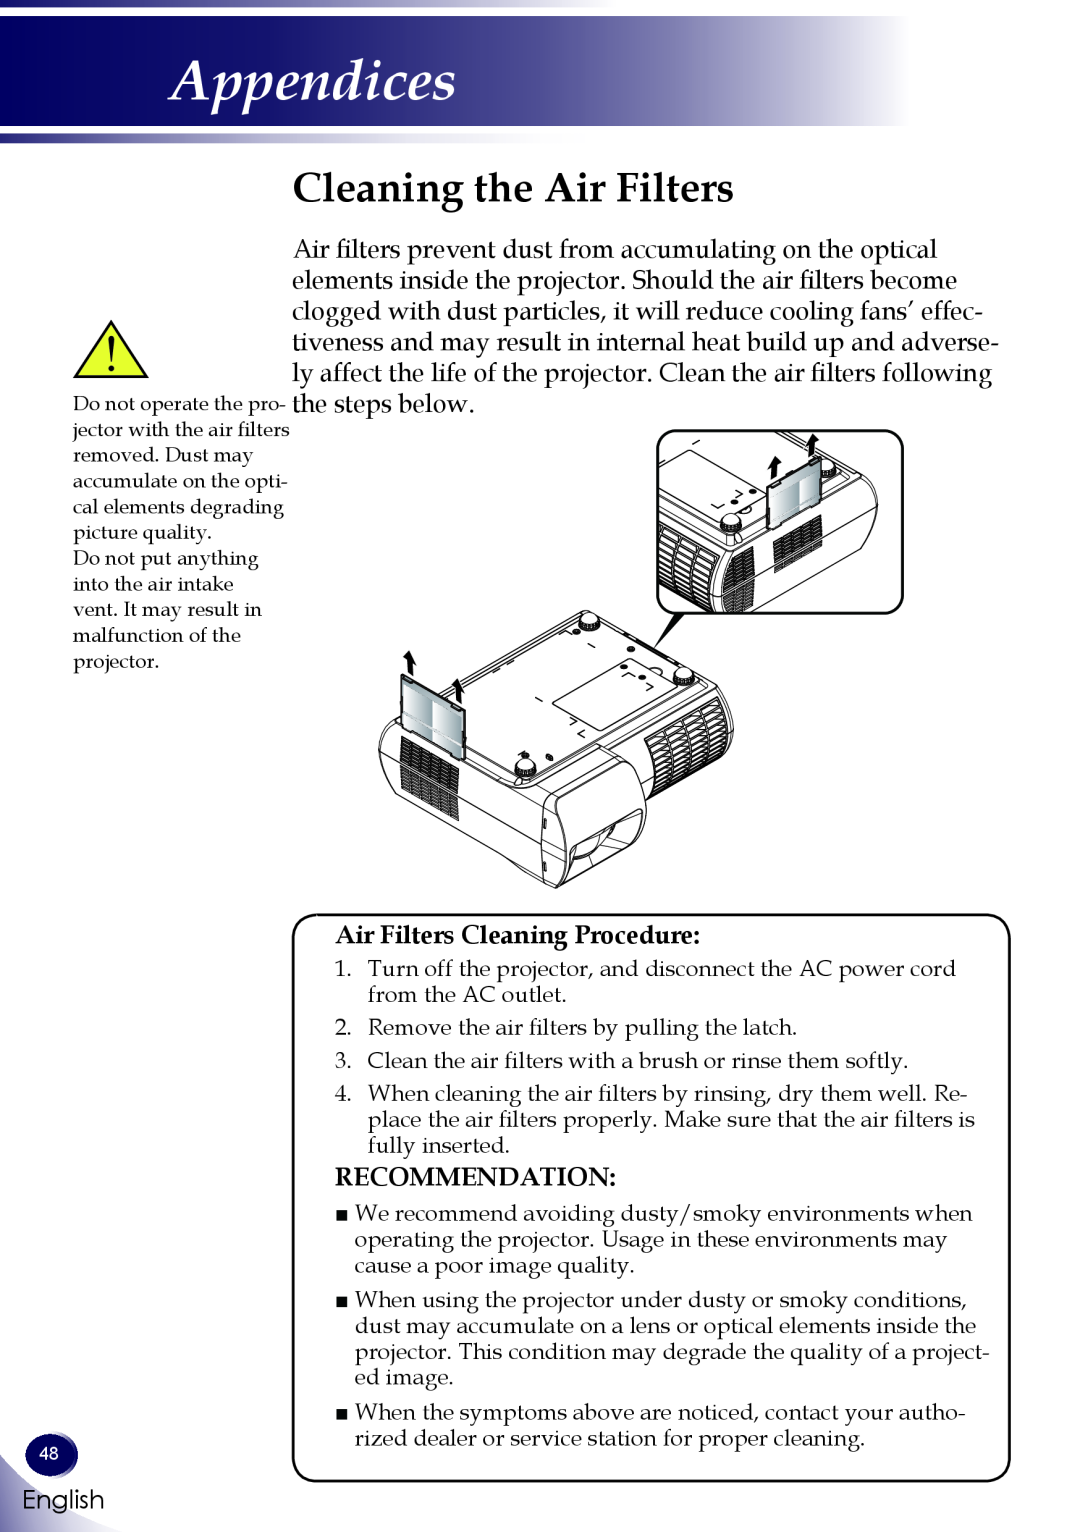 Sanyo PDG-DWL100 owner manual Cleaning the Air Filters, Air Filters Cleaning Procedure, Recommendation, Appendices 